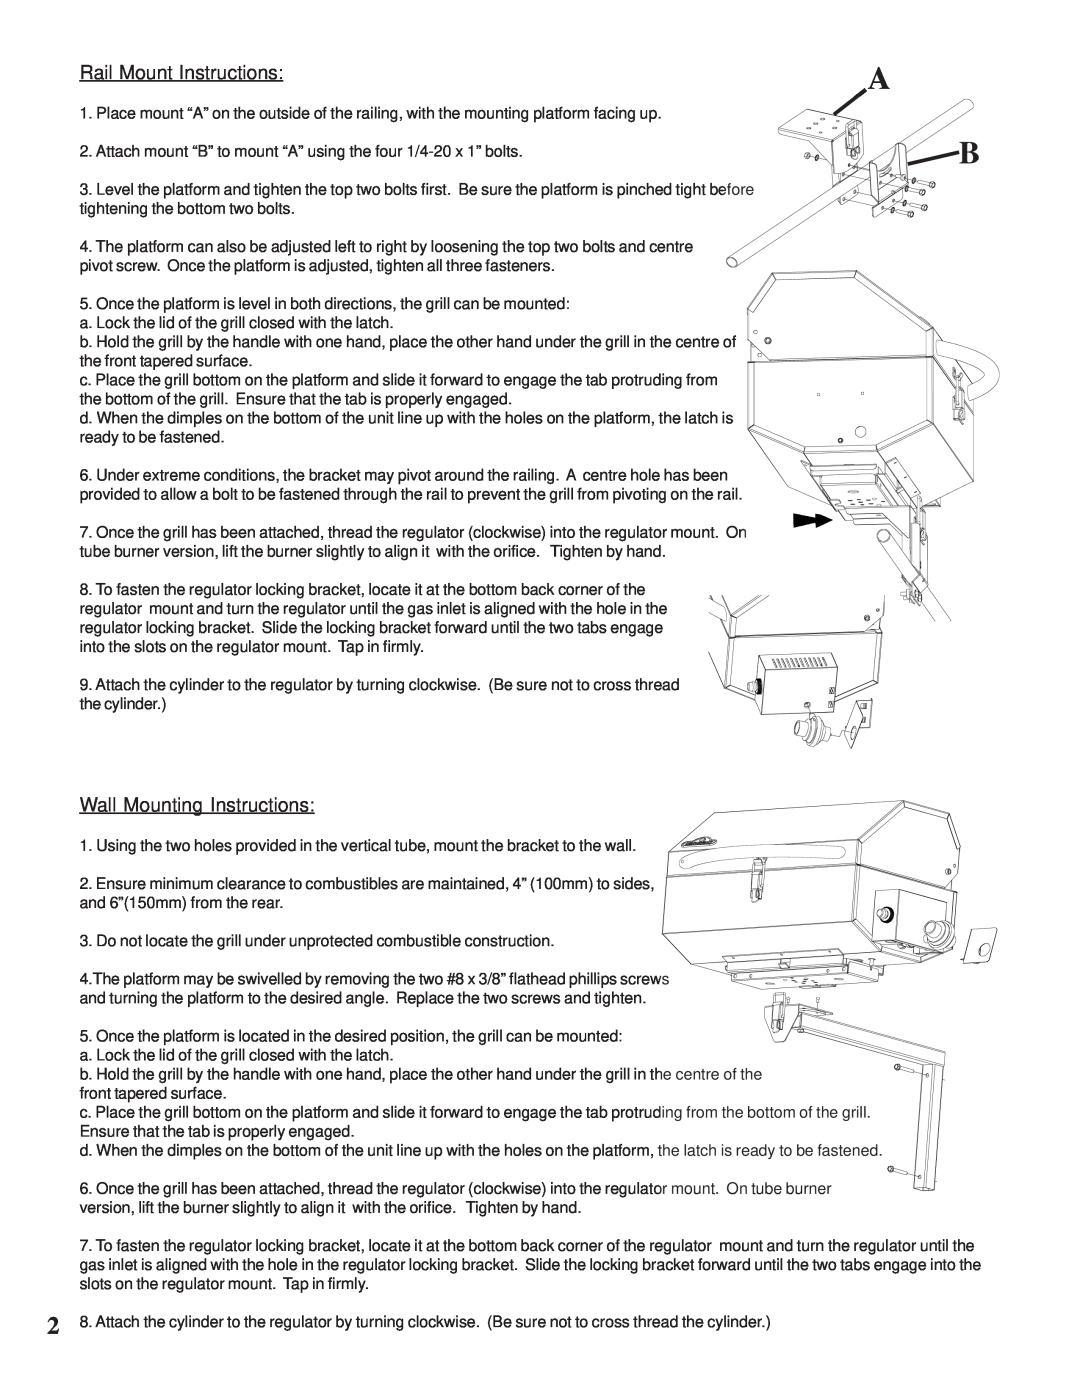 Napoleon Grills N415-0117 manual Rail Mount Instructions, Wall Mounting Instructions 